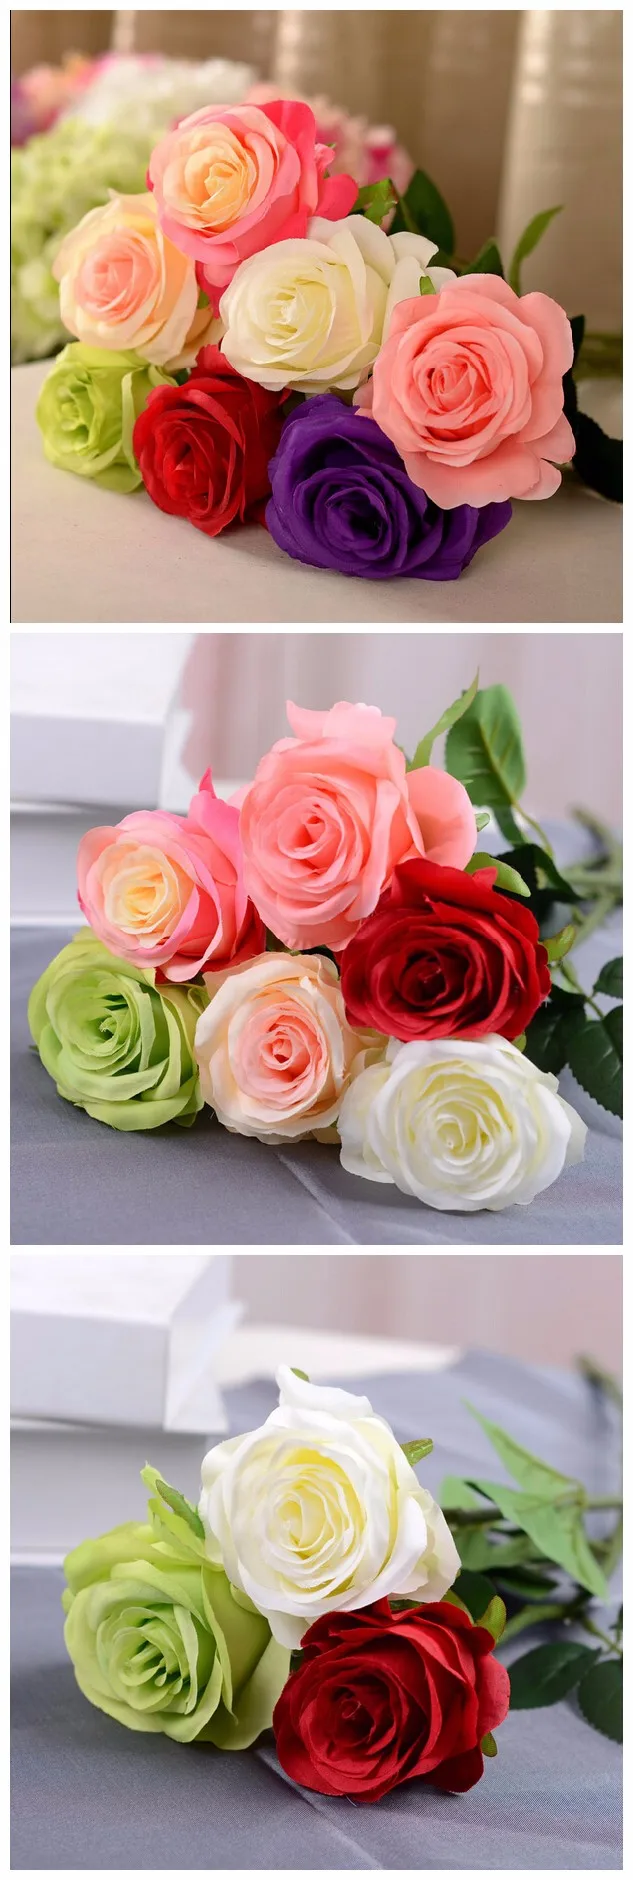 New T Sale In Alibaba China Artificial Flower Decor Wedding Artificial ...